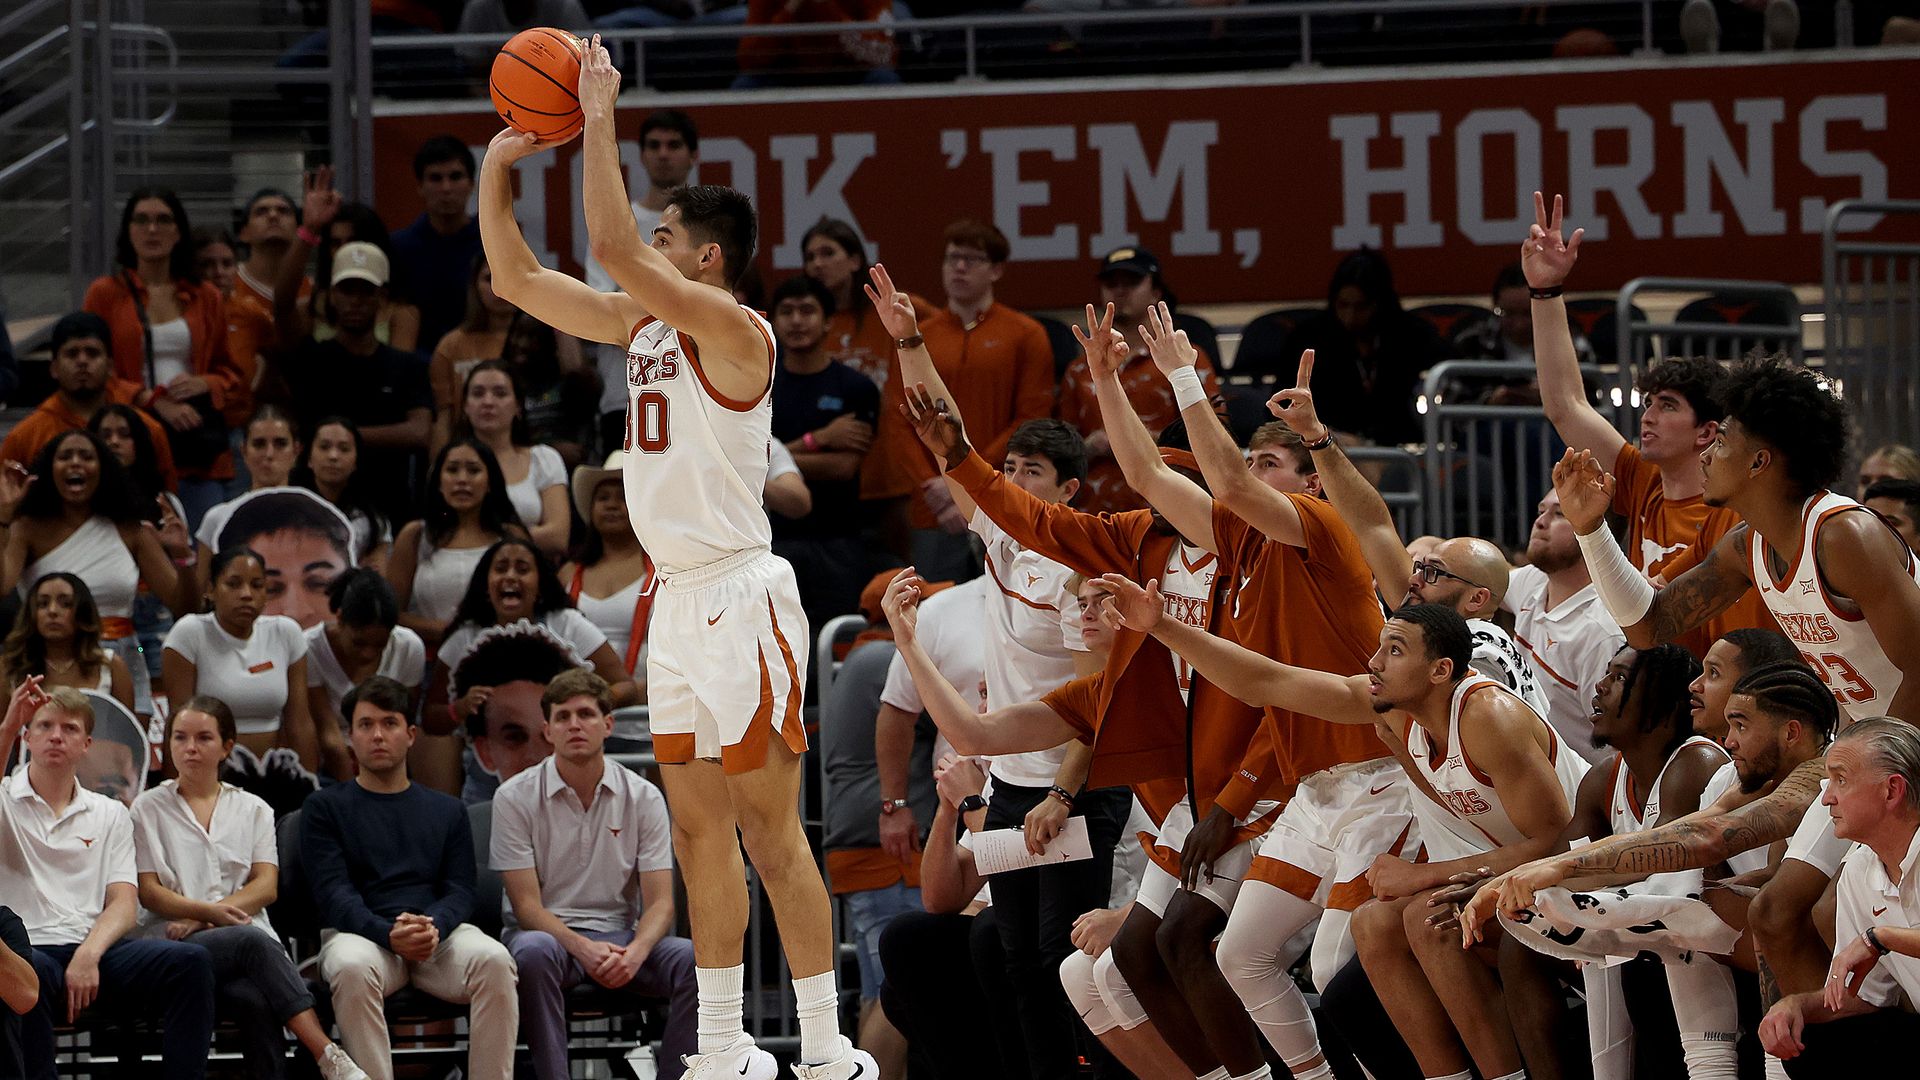 Brock Cunningham of the University of Texas shoots a three-pointer.